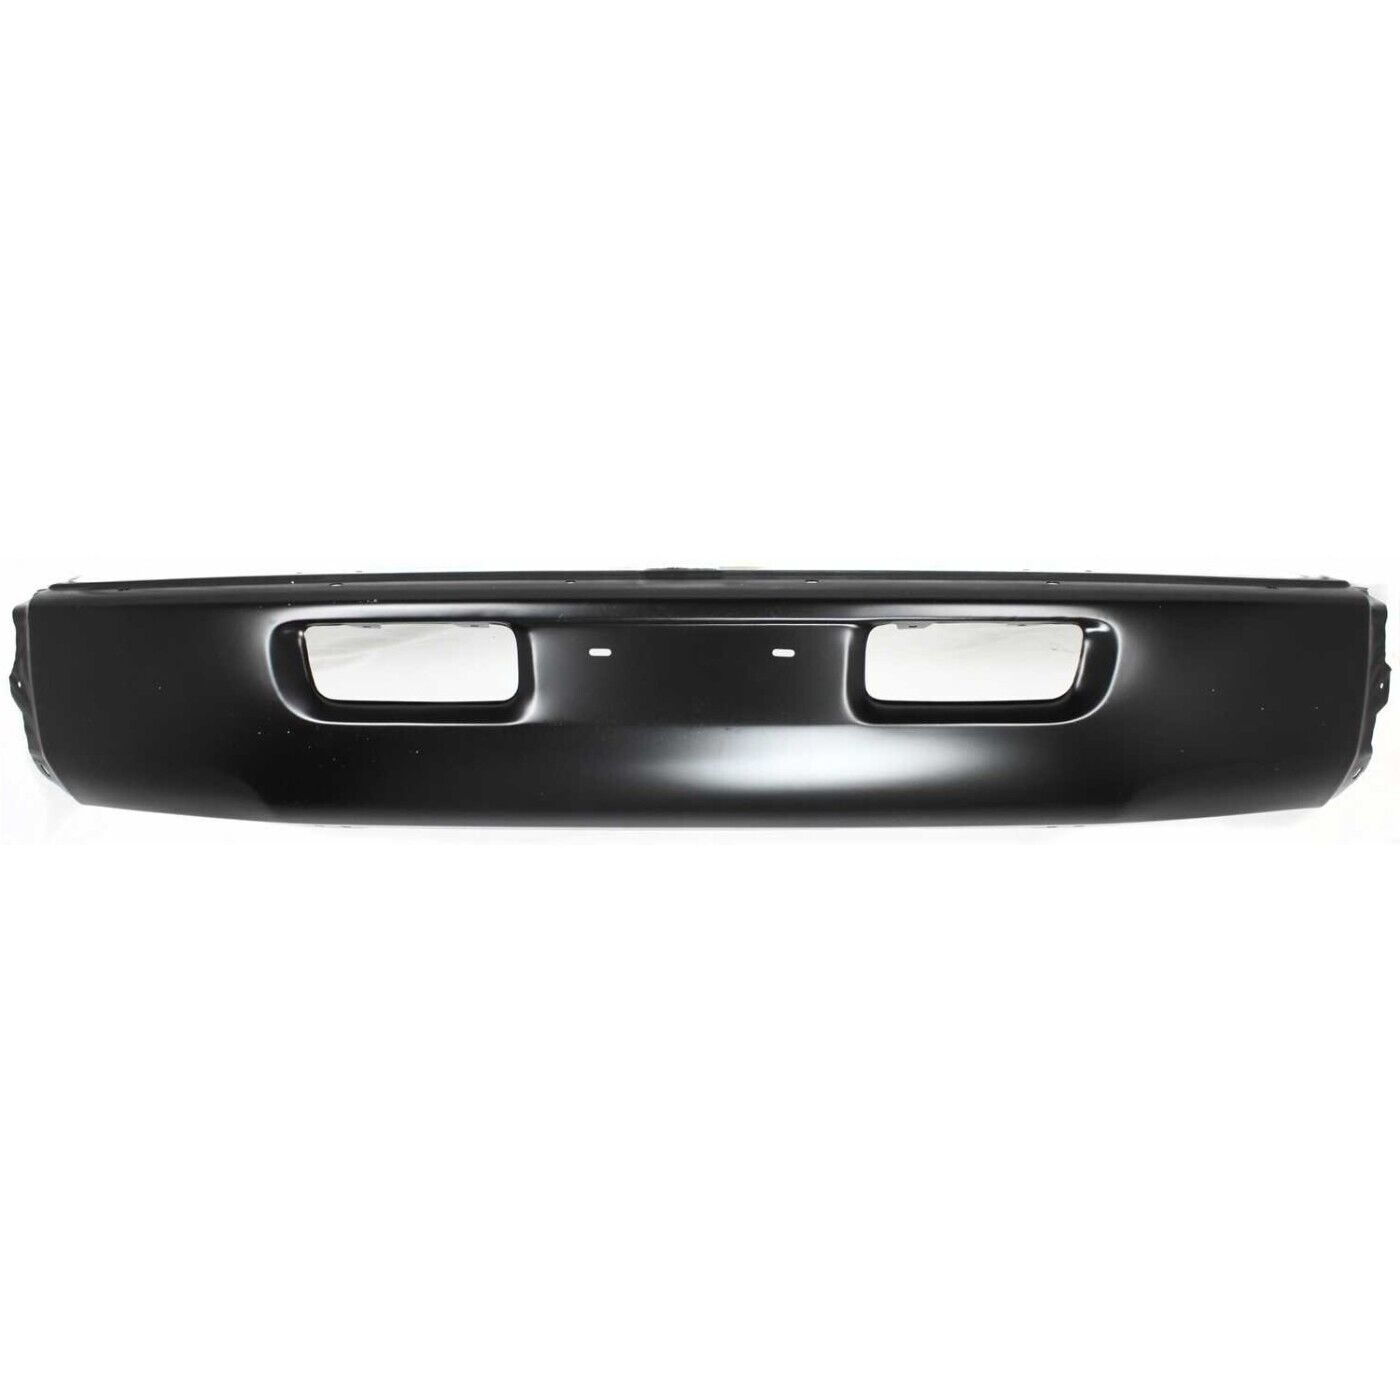 Front Bumper For 1993-1994 Toyota Land Cruiser w/ Pad Holes, Steel, Ptd. Black